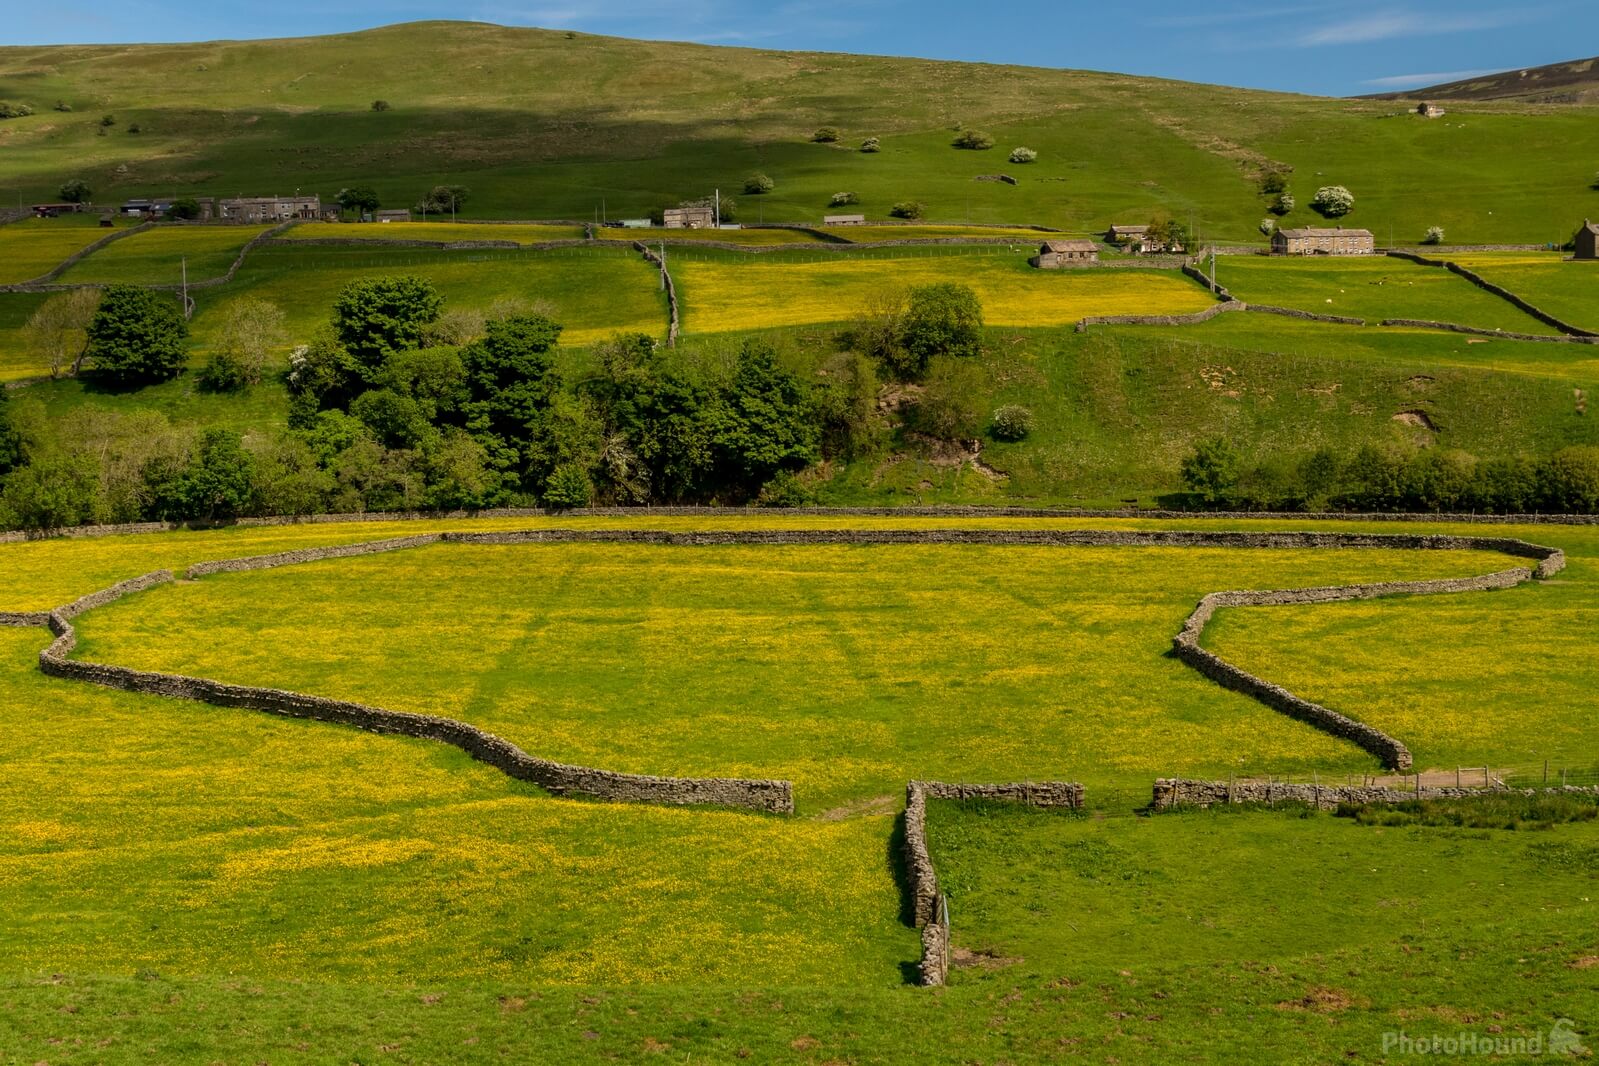 Image of Gunnerside 2 by Andy Killingbeck